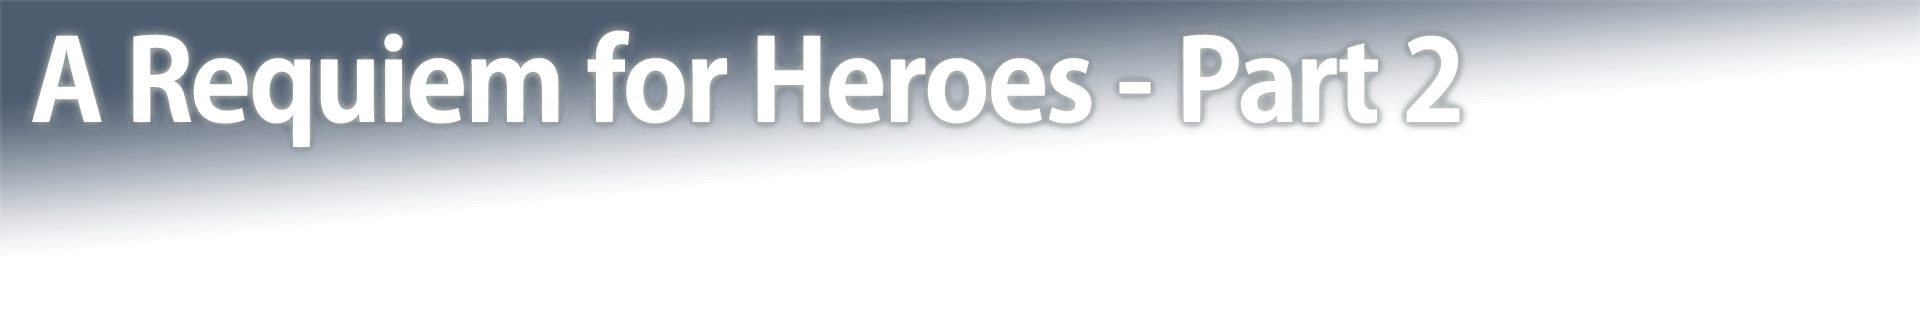 A Requiem for Heroes - Part 2